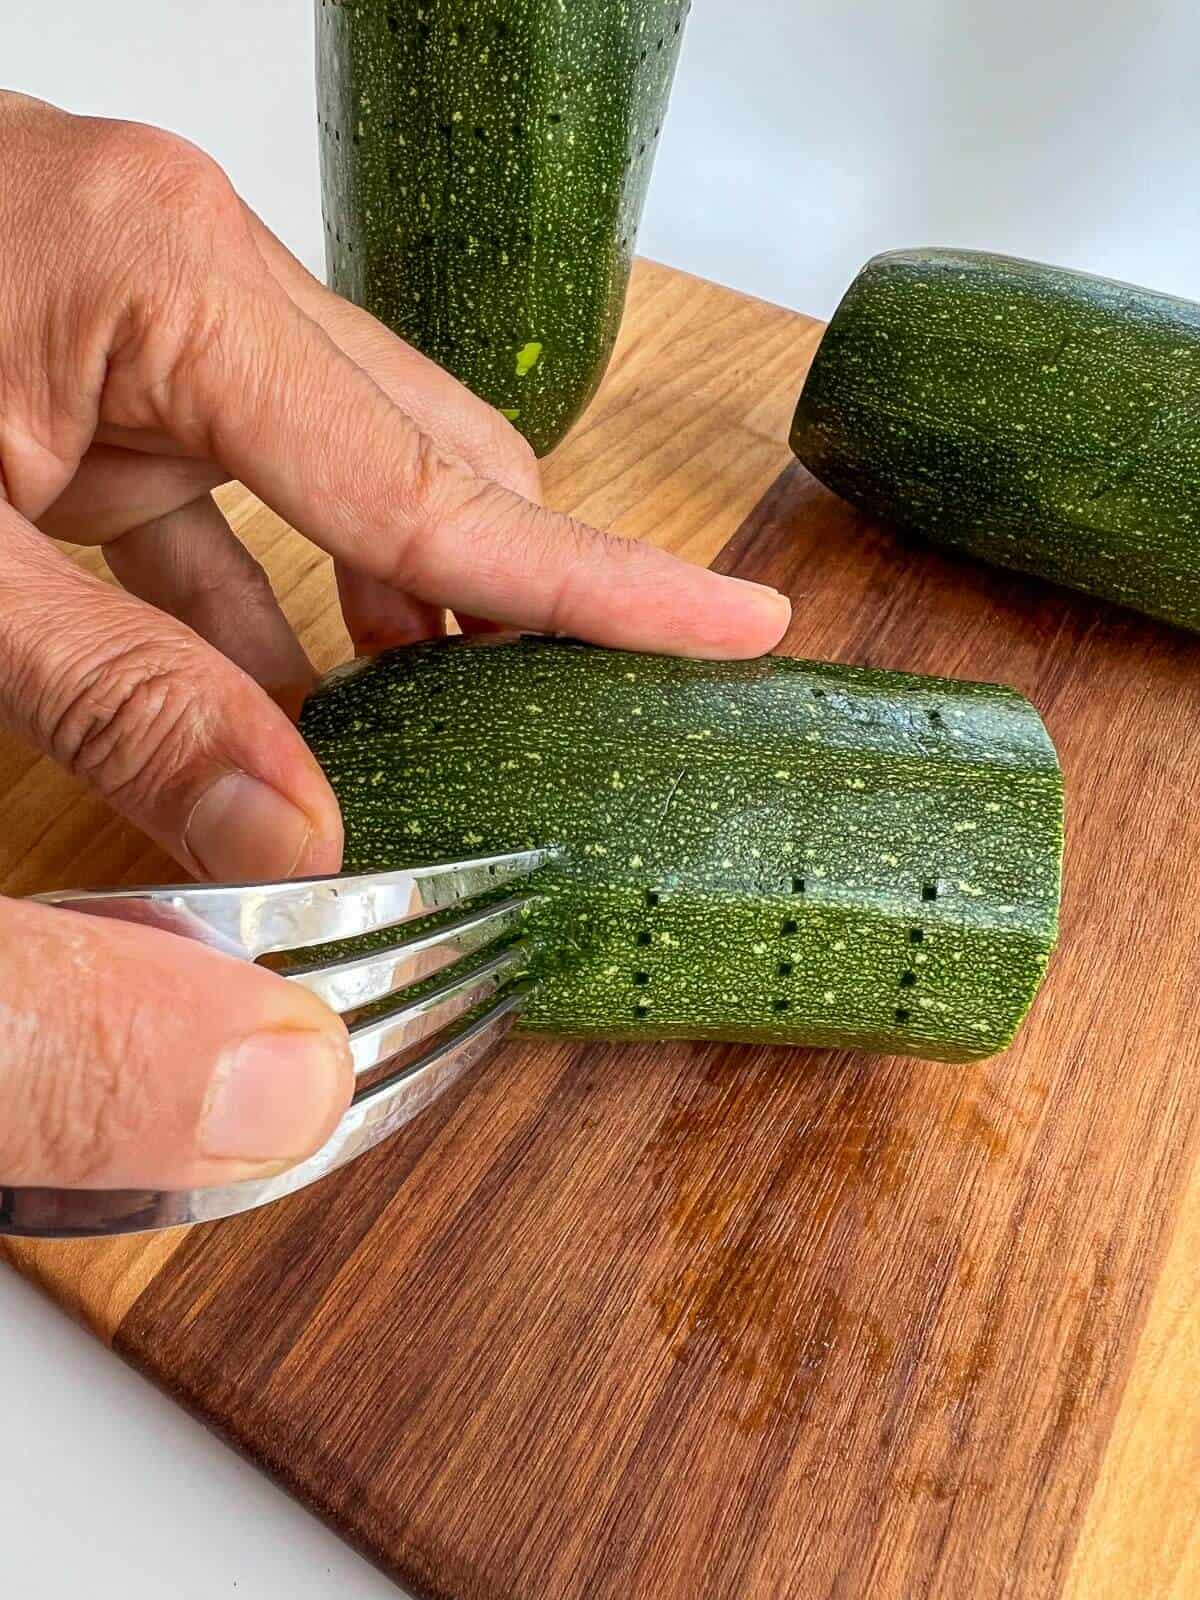 piercing zucchini outer side with a fork.